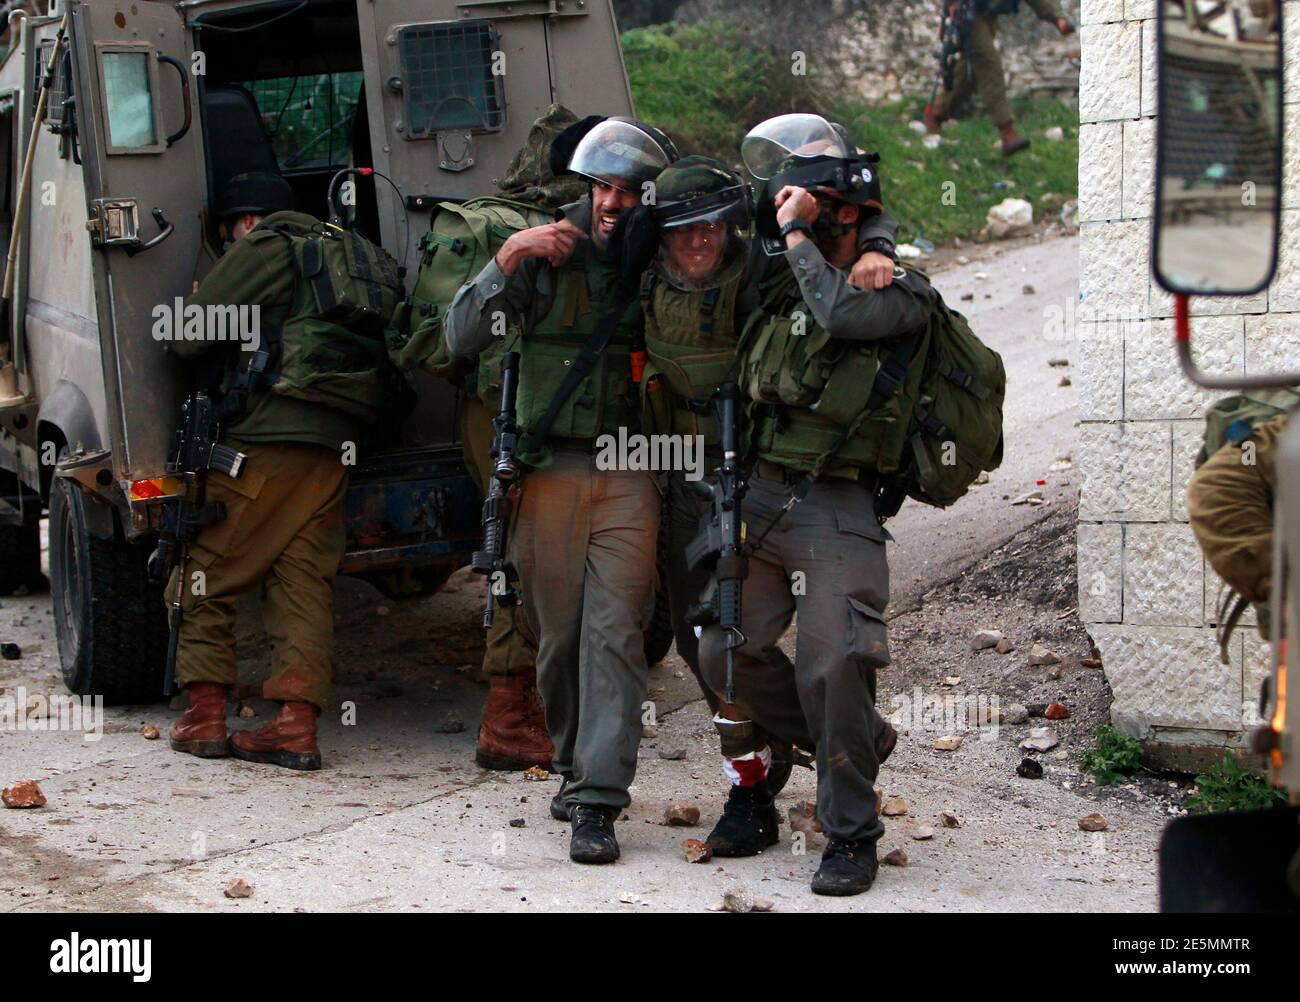 Israeli border police officers help an injured officer during clashes with stone throwing Palestinians protesting against a nearby Jewish settlement in the West Bank village of Burin, south of Nablus February 2, 2013. Israeli soldiers used tear gas and stun grenades on Saturday to disperse about 150 Palestinians trying to block expansion of Israeli settlements in the occupied West Bank.  Both sides sustained light injuries as the soldiers removed about a dozen tents and small huts from land adjacent to the Palestinian northern West Bank village of Burin, Palestinian witnesses and the Army said Stock Photo